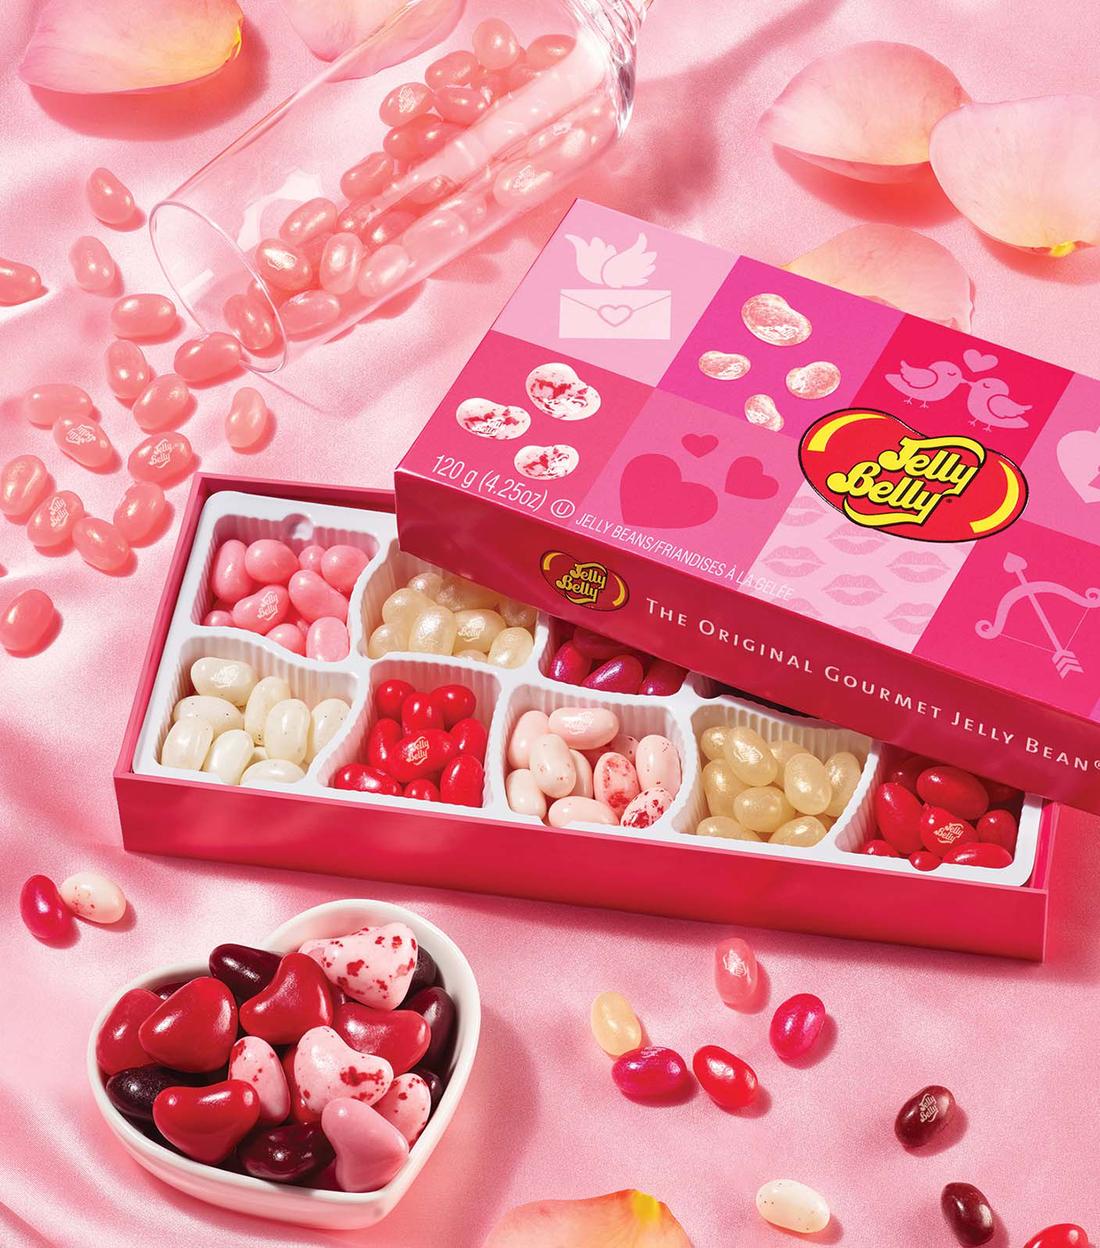 A valentines box of jelly beans next to a wine glass of spilled pink jelly beans and a heart shaped bowl filled with heart shaped candy